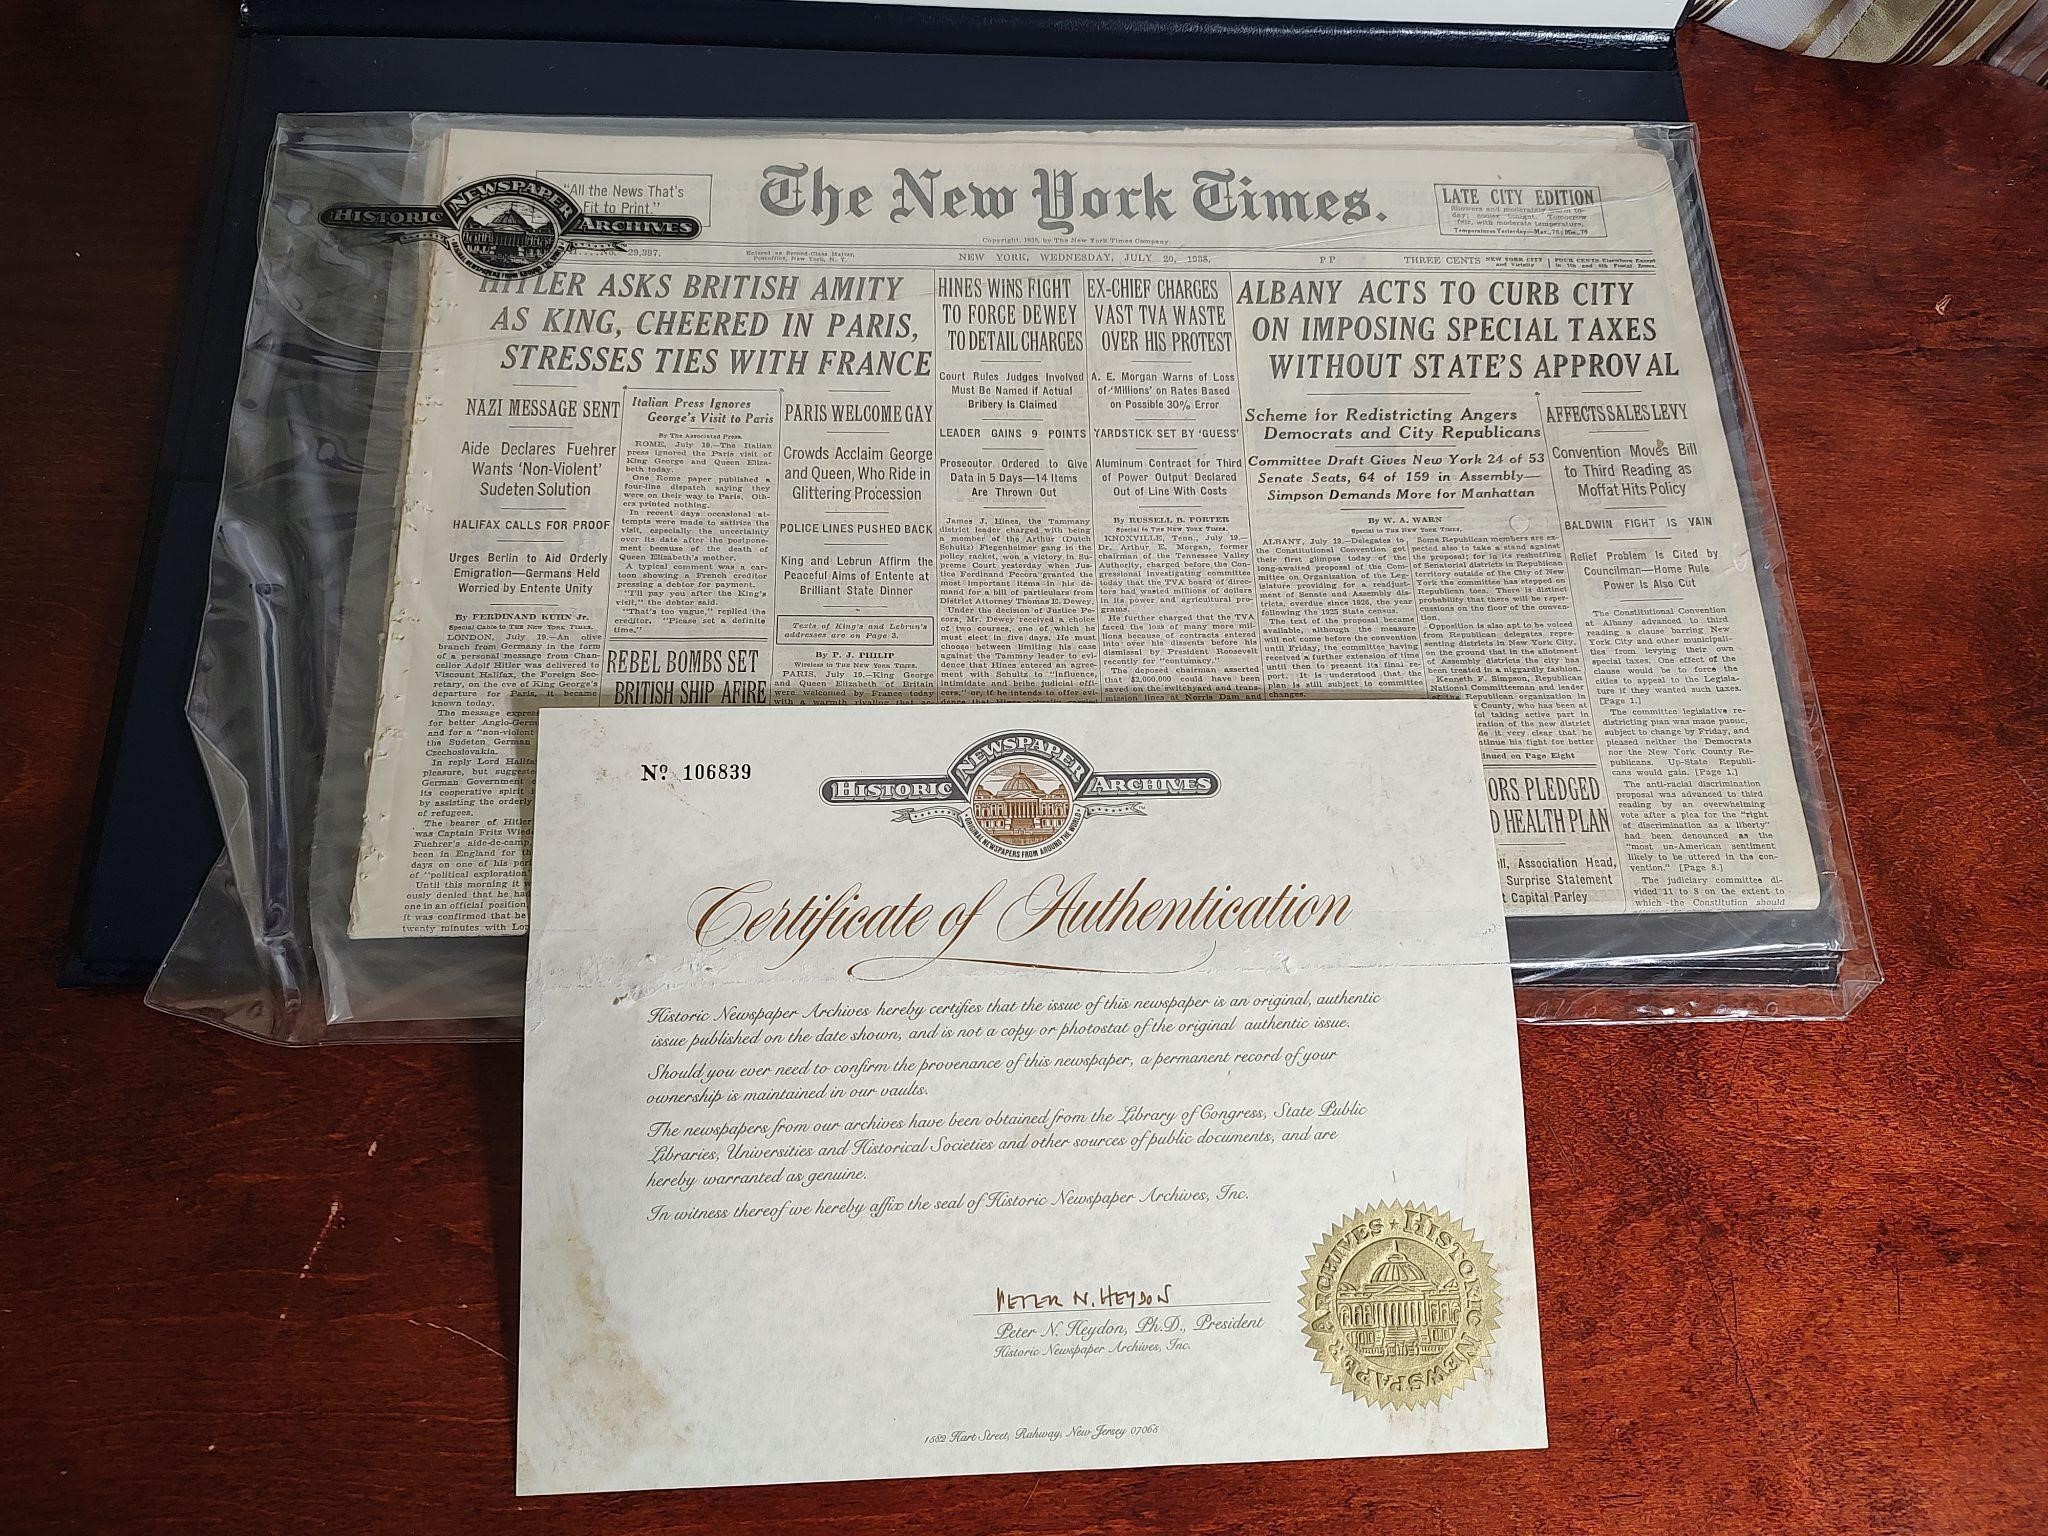 Certified NY Times Newspaper from 1938